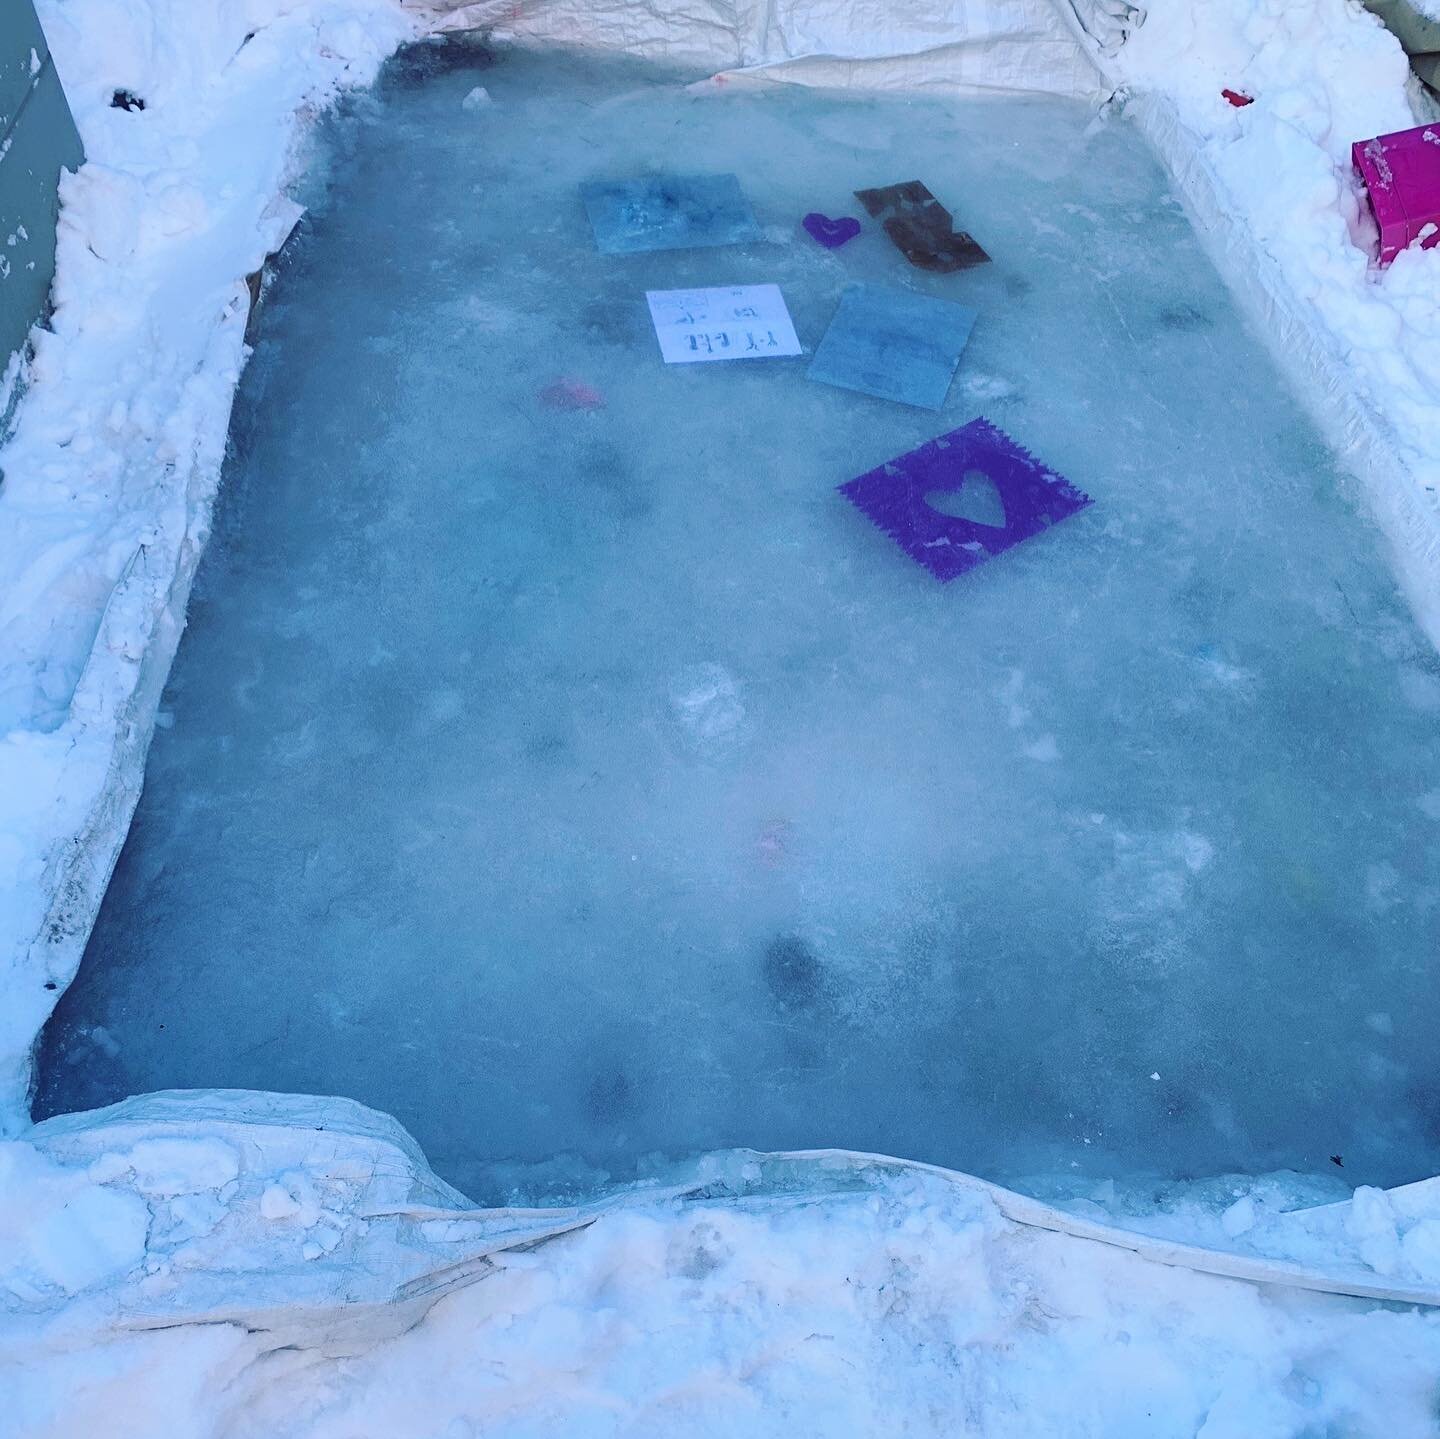 Margot and Elliot&rsquo;s &ldquo;frozen art display&rdquo; =&gt;They placed some drawings and cutouts into their backyard skating rink and flooded it with water! #artsmartclinton